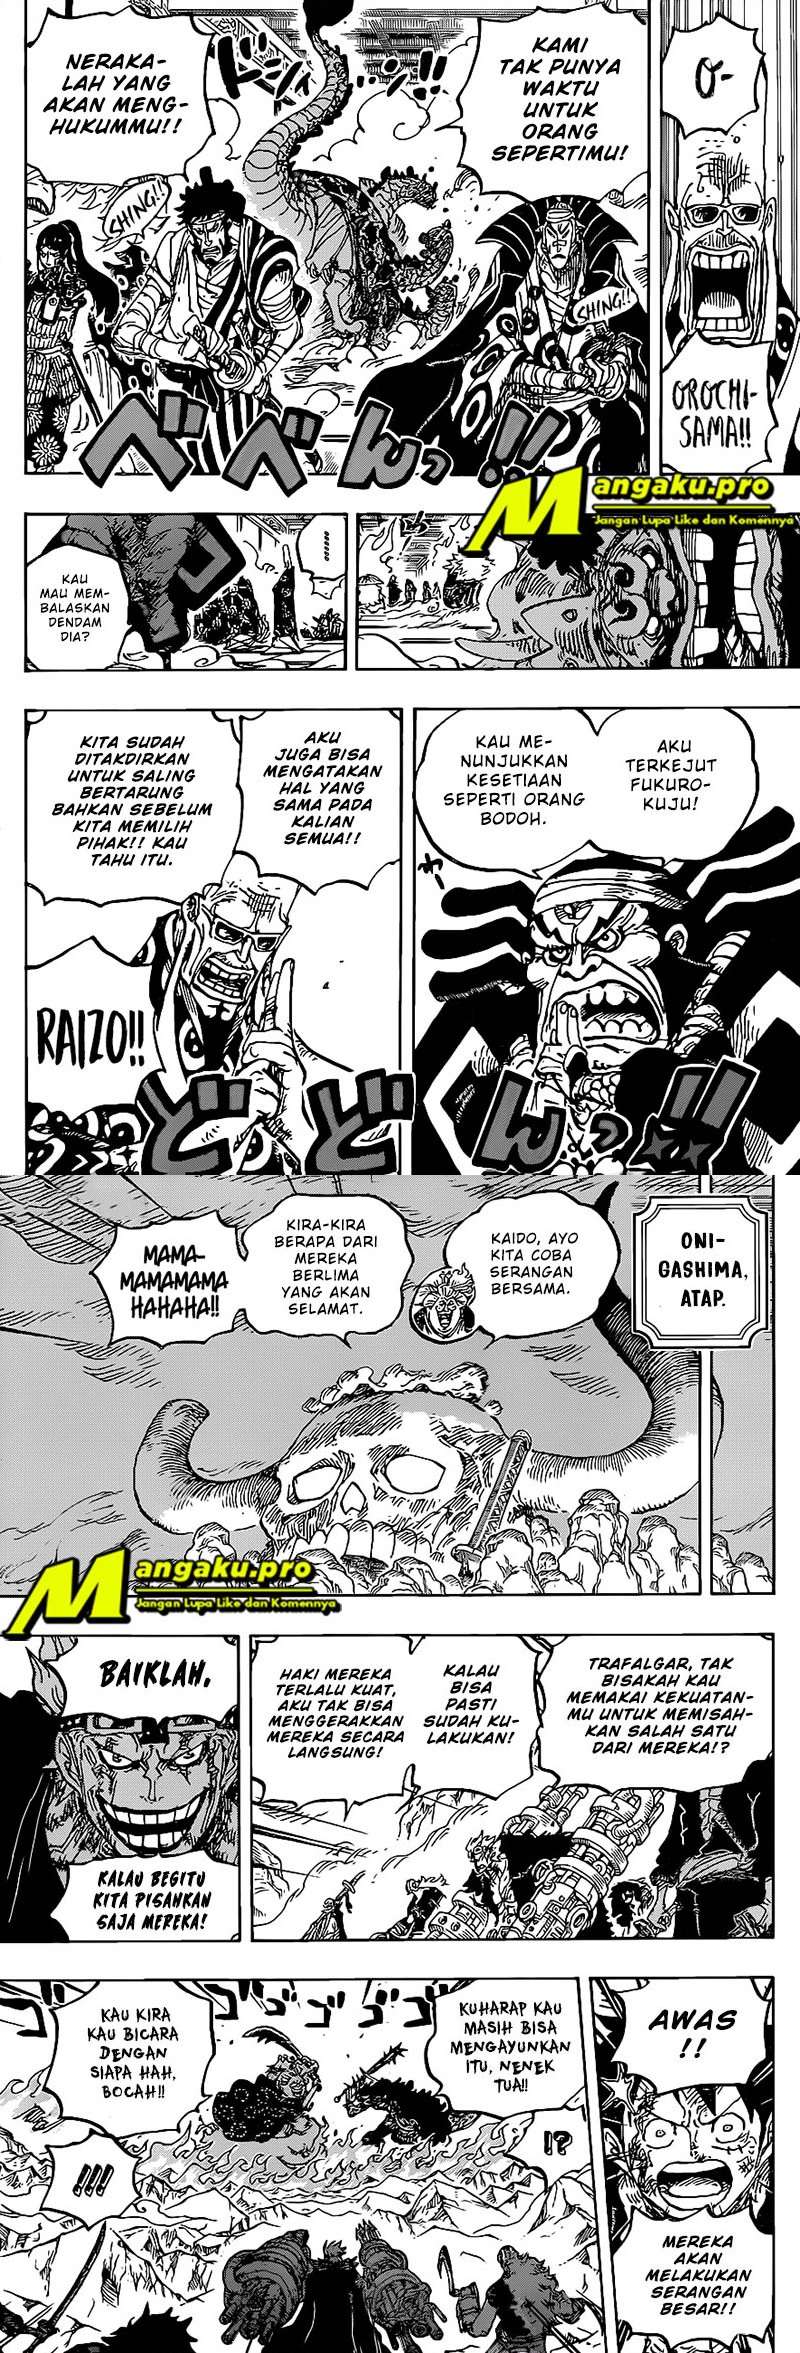 One Piece Chapter 1009 Hq - 63